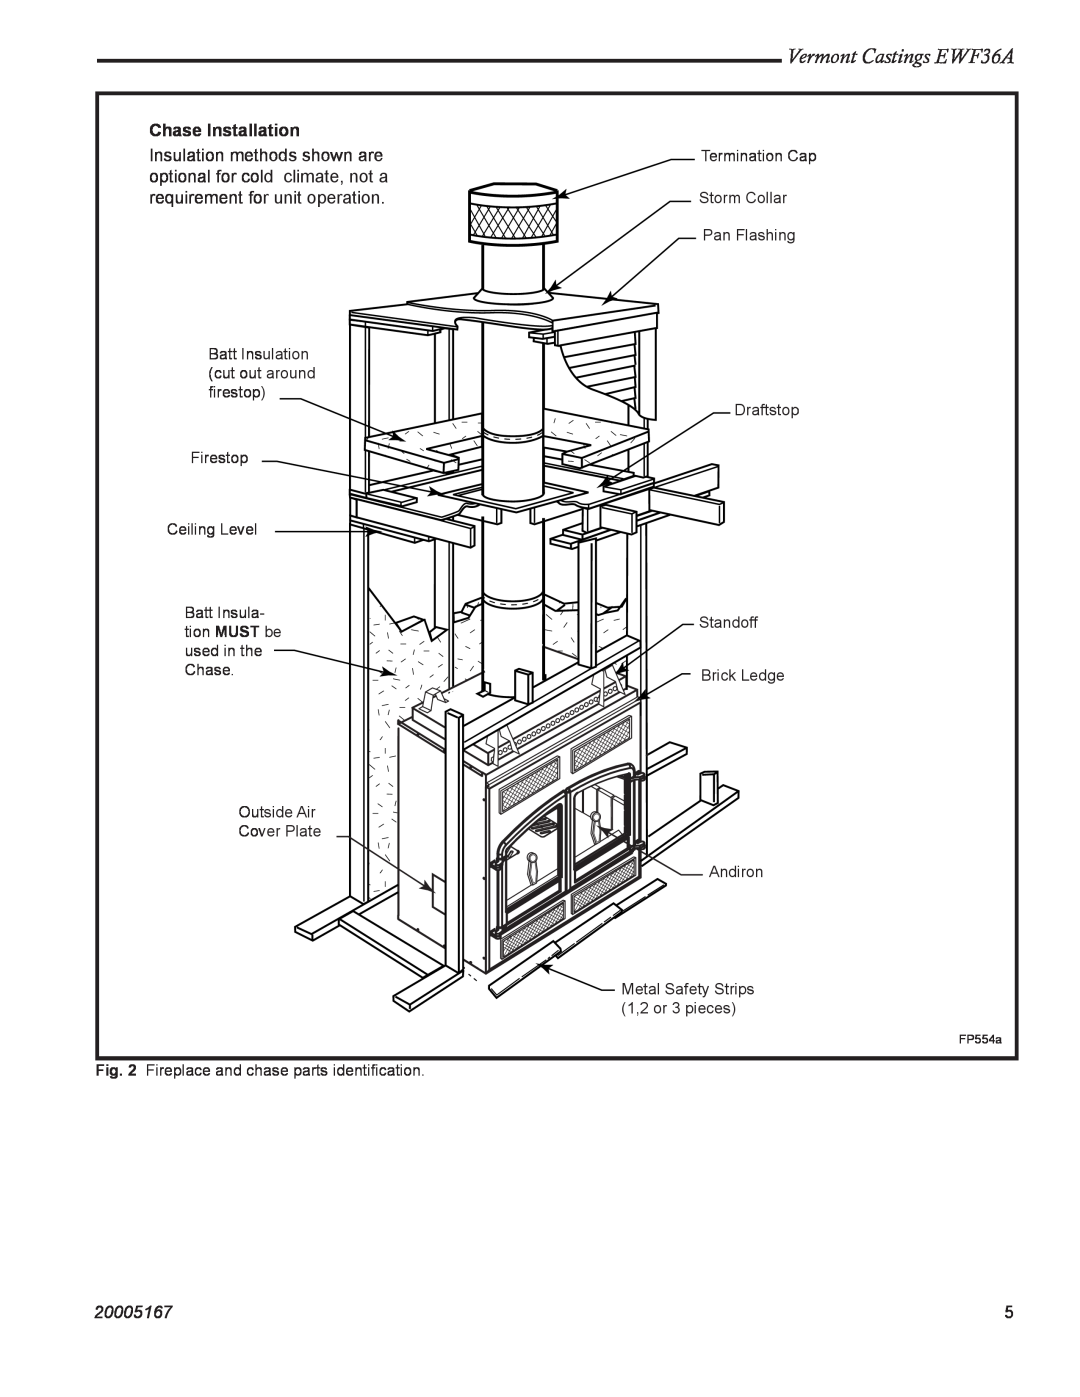 MHP manual Vermont Castings EWF36A, Chase Installation, 20005167 